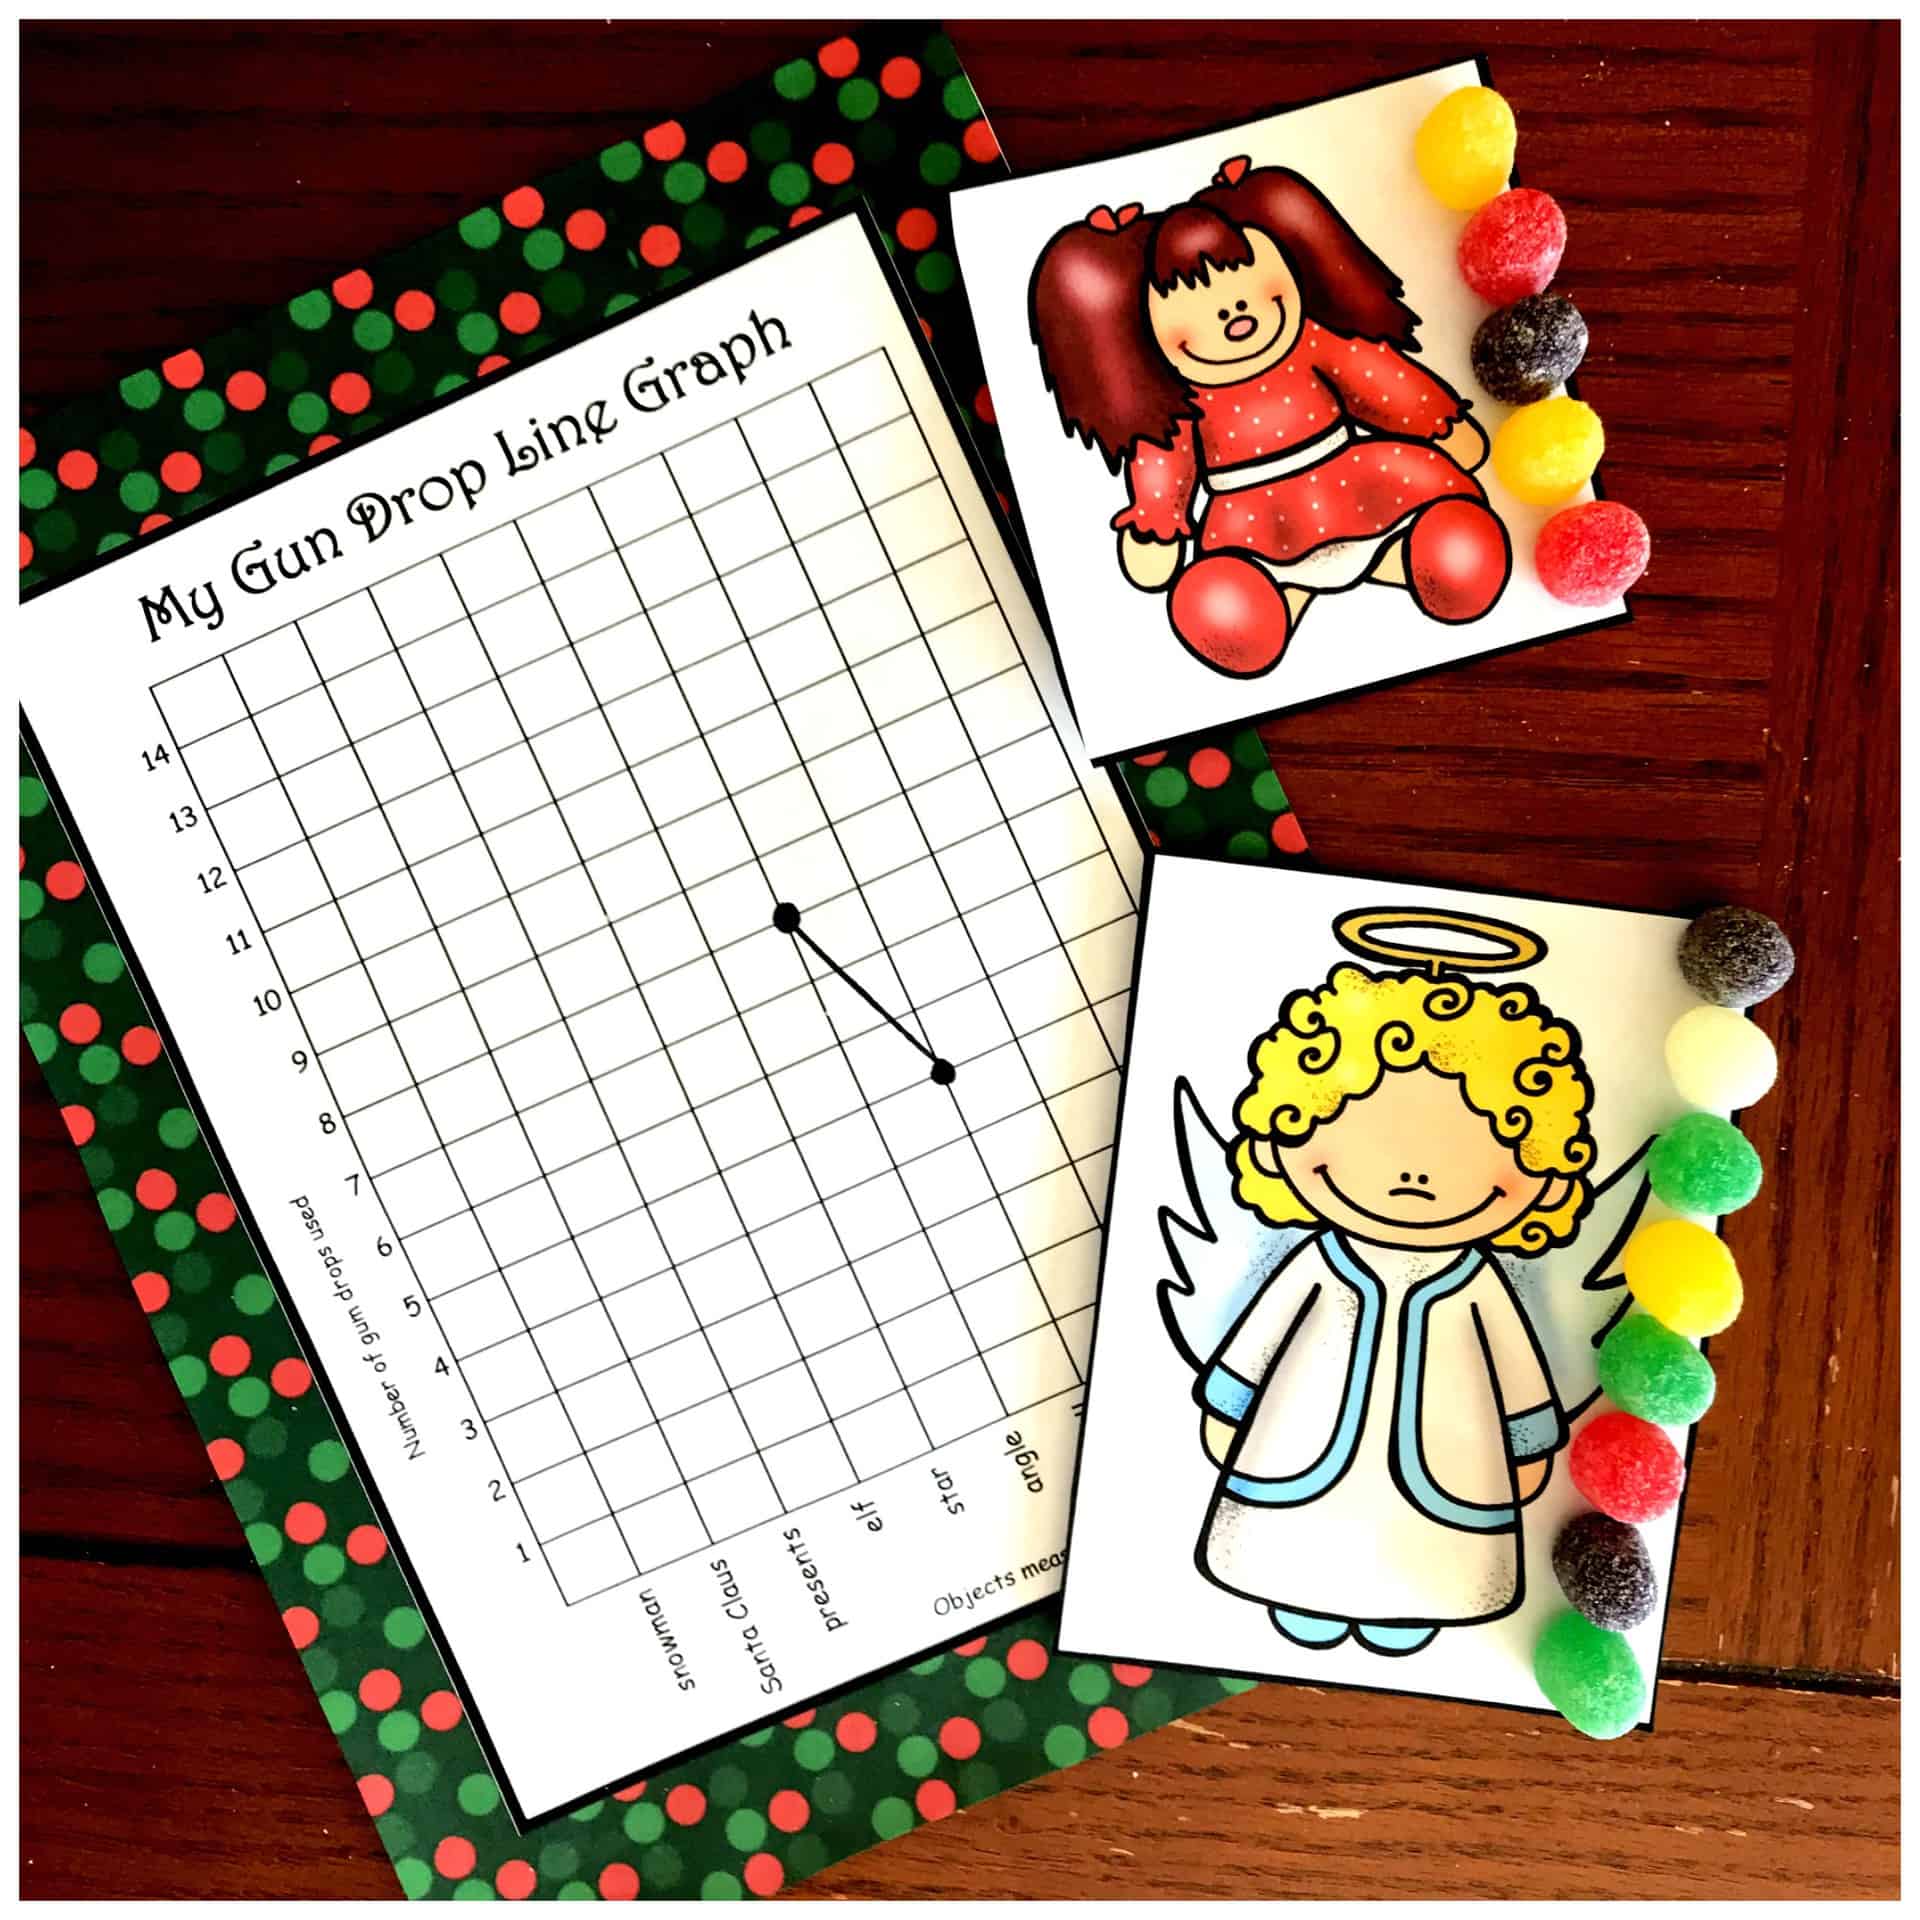 Here’s A Christmas Measuring and Line Graph Activity